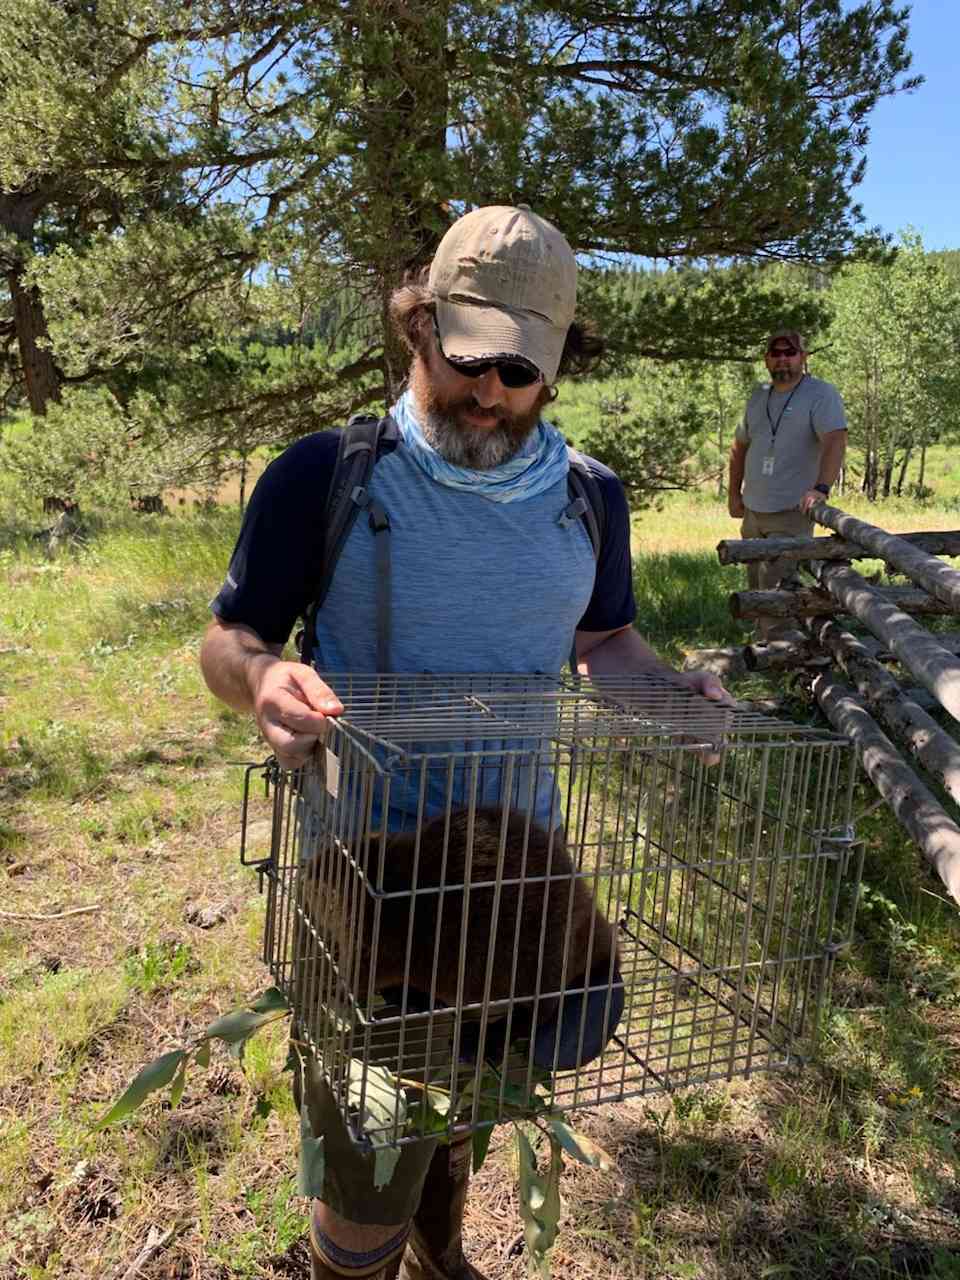 Aaron carrying beaver in cage